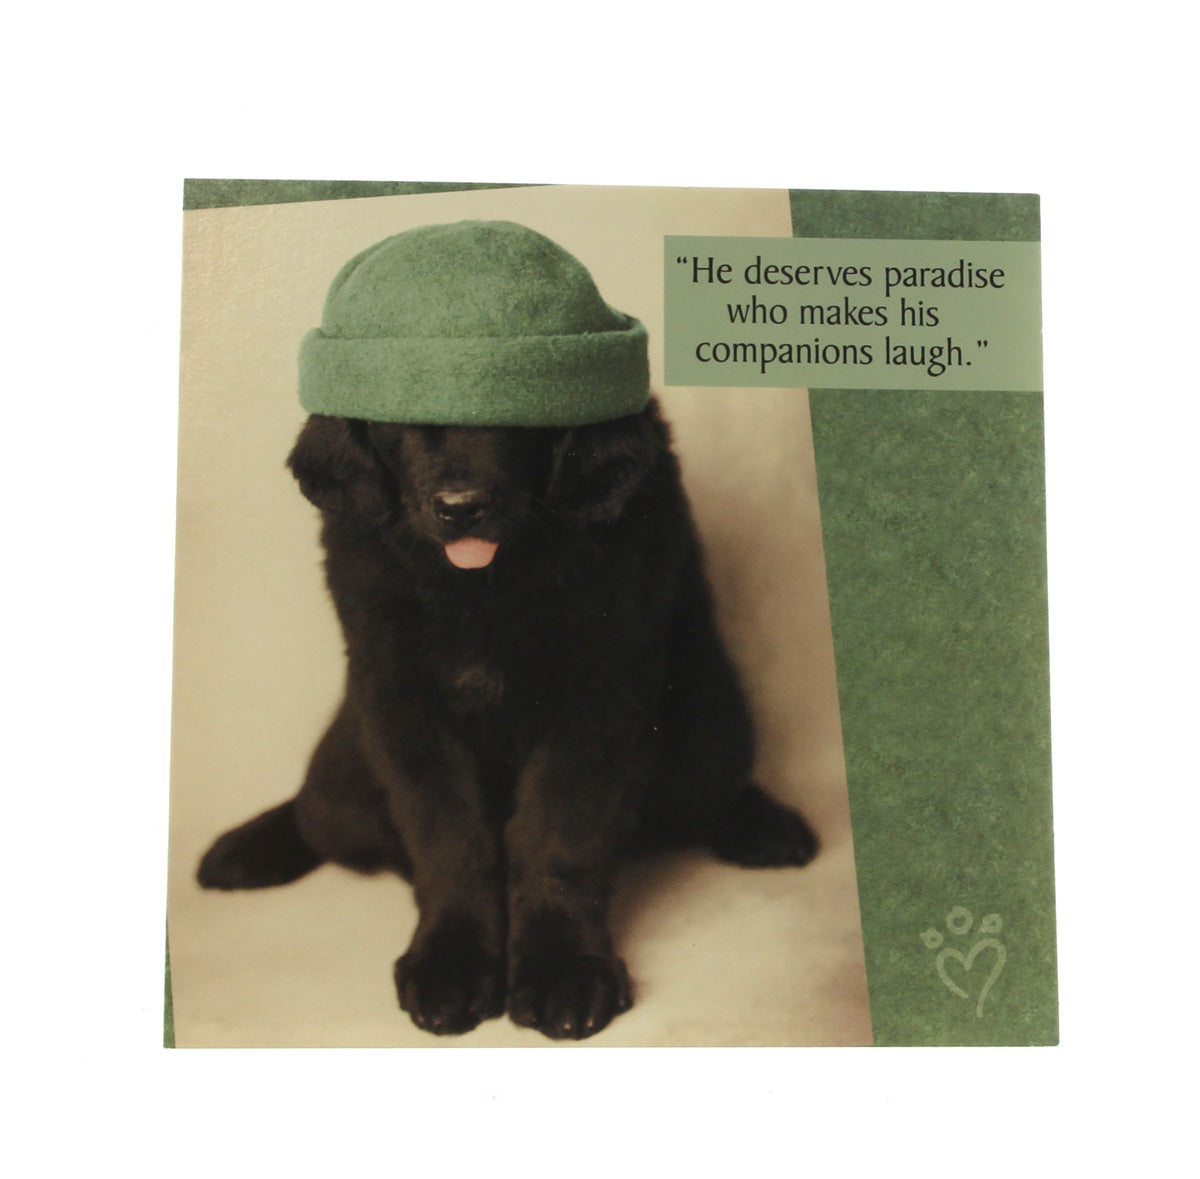 Friendship Card Qubes: "He deserves paradise... (image of Dog with hat)